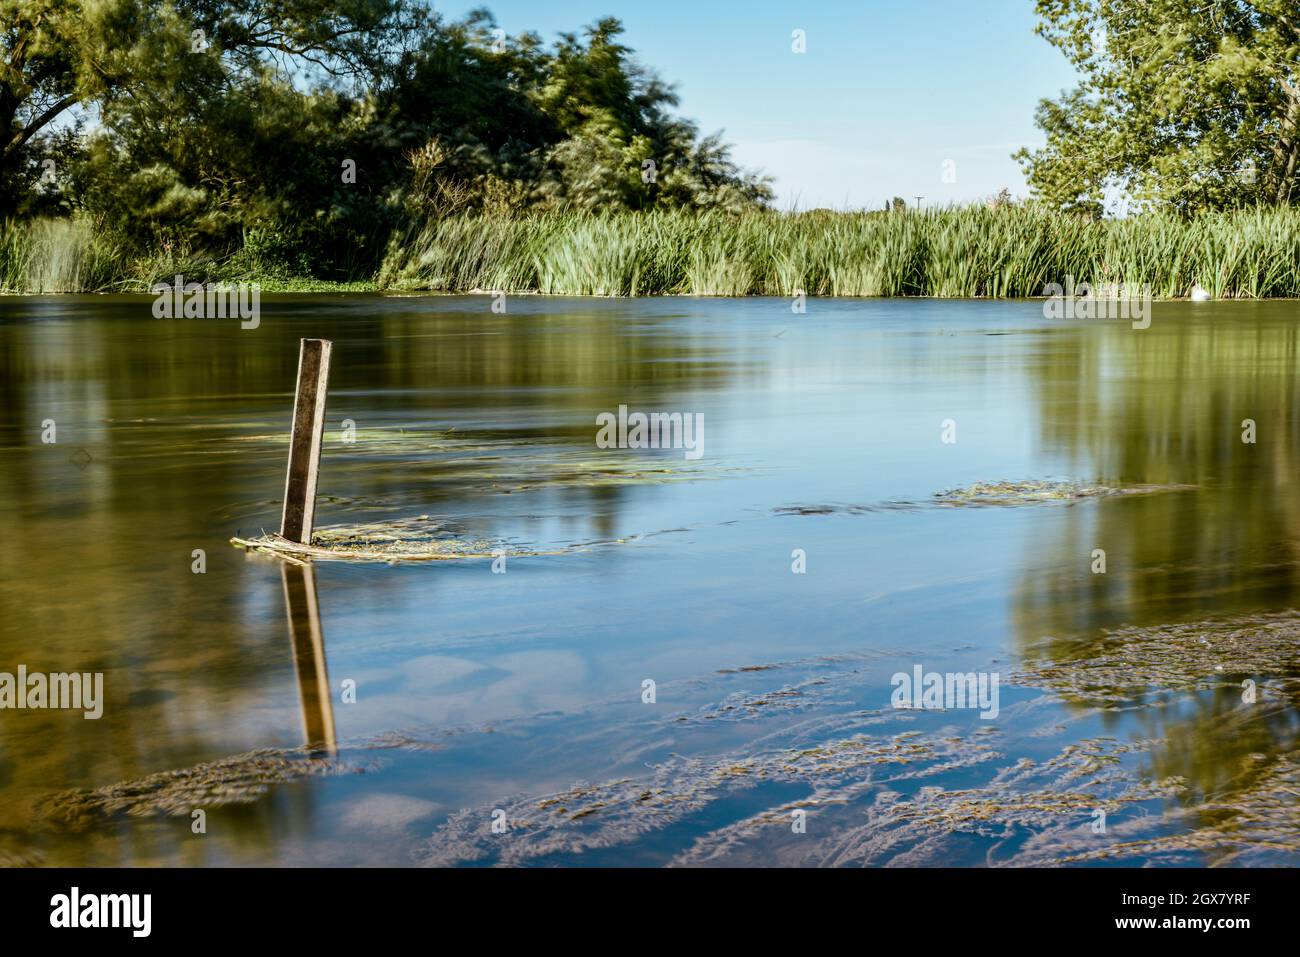 Calm water on a lake in a quiet countryside location Stock Photo